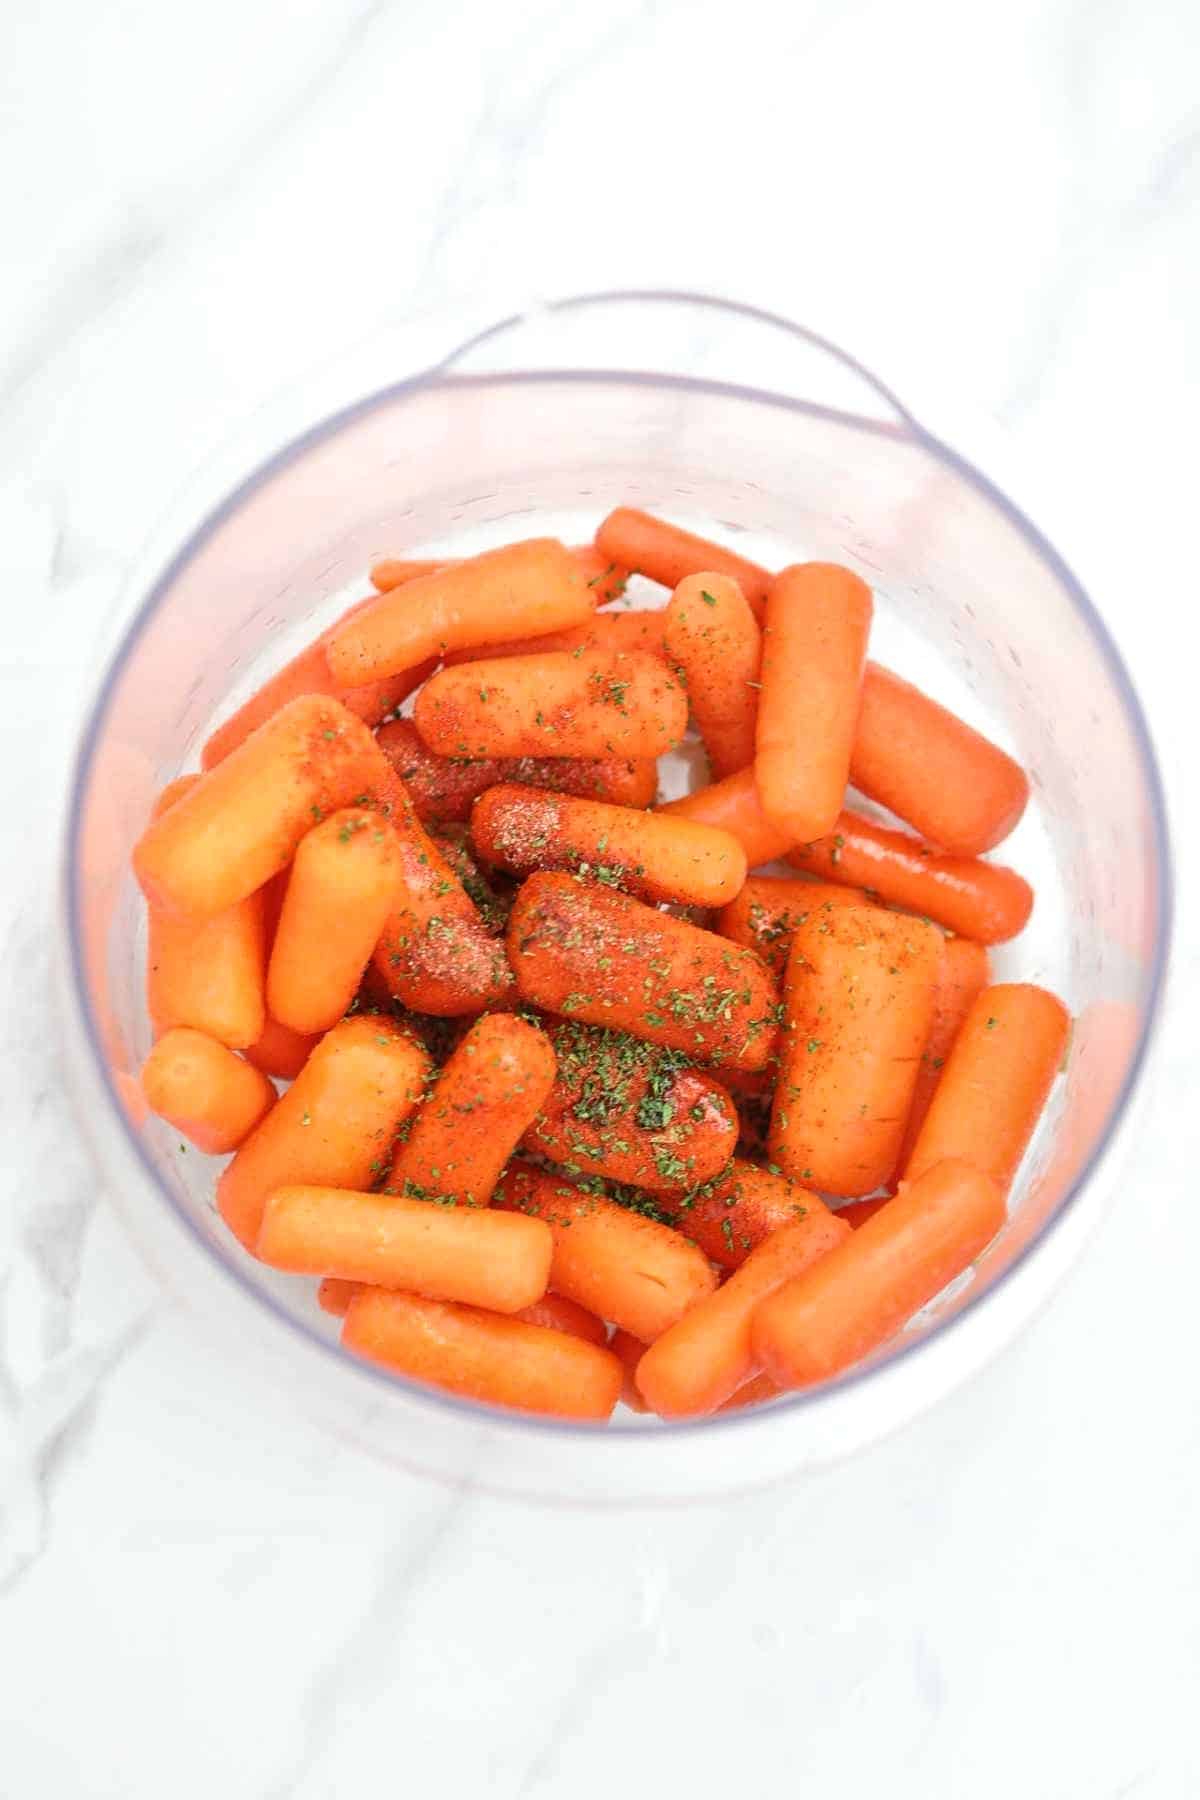 carrots and seasoning in a bowl.